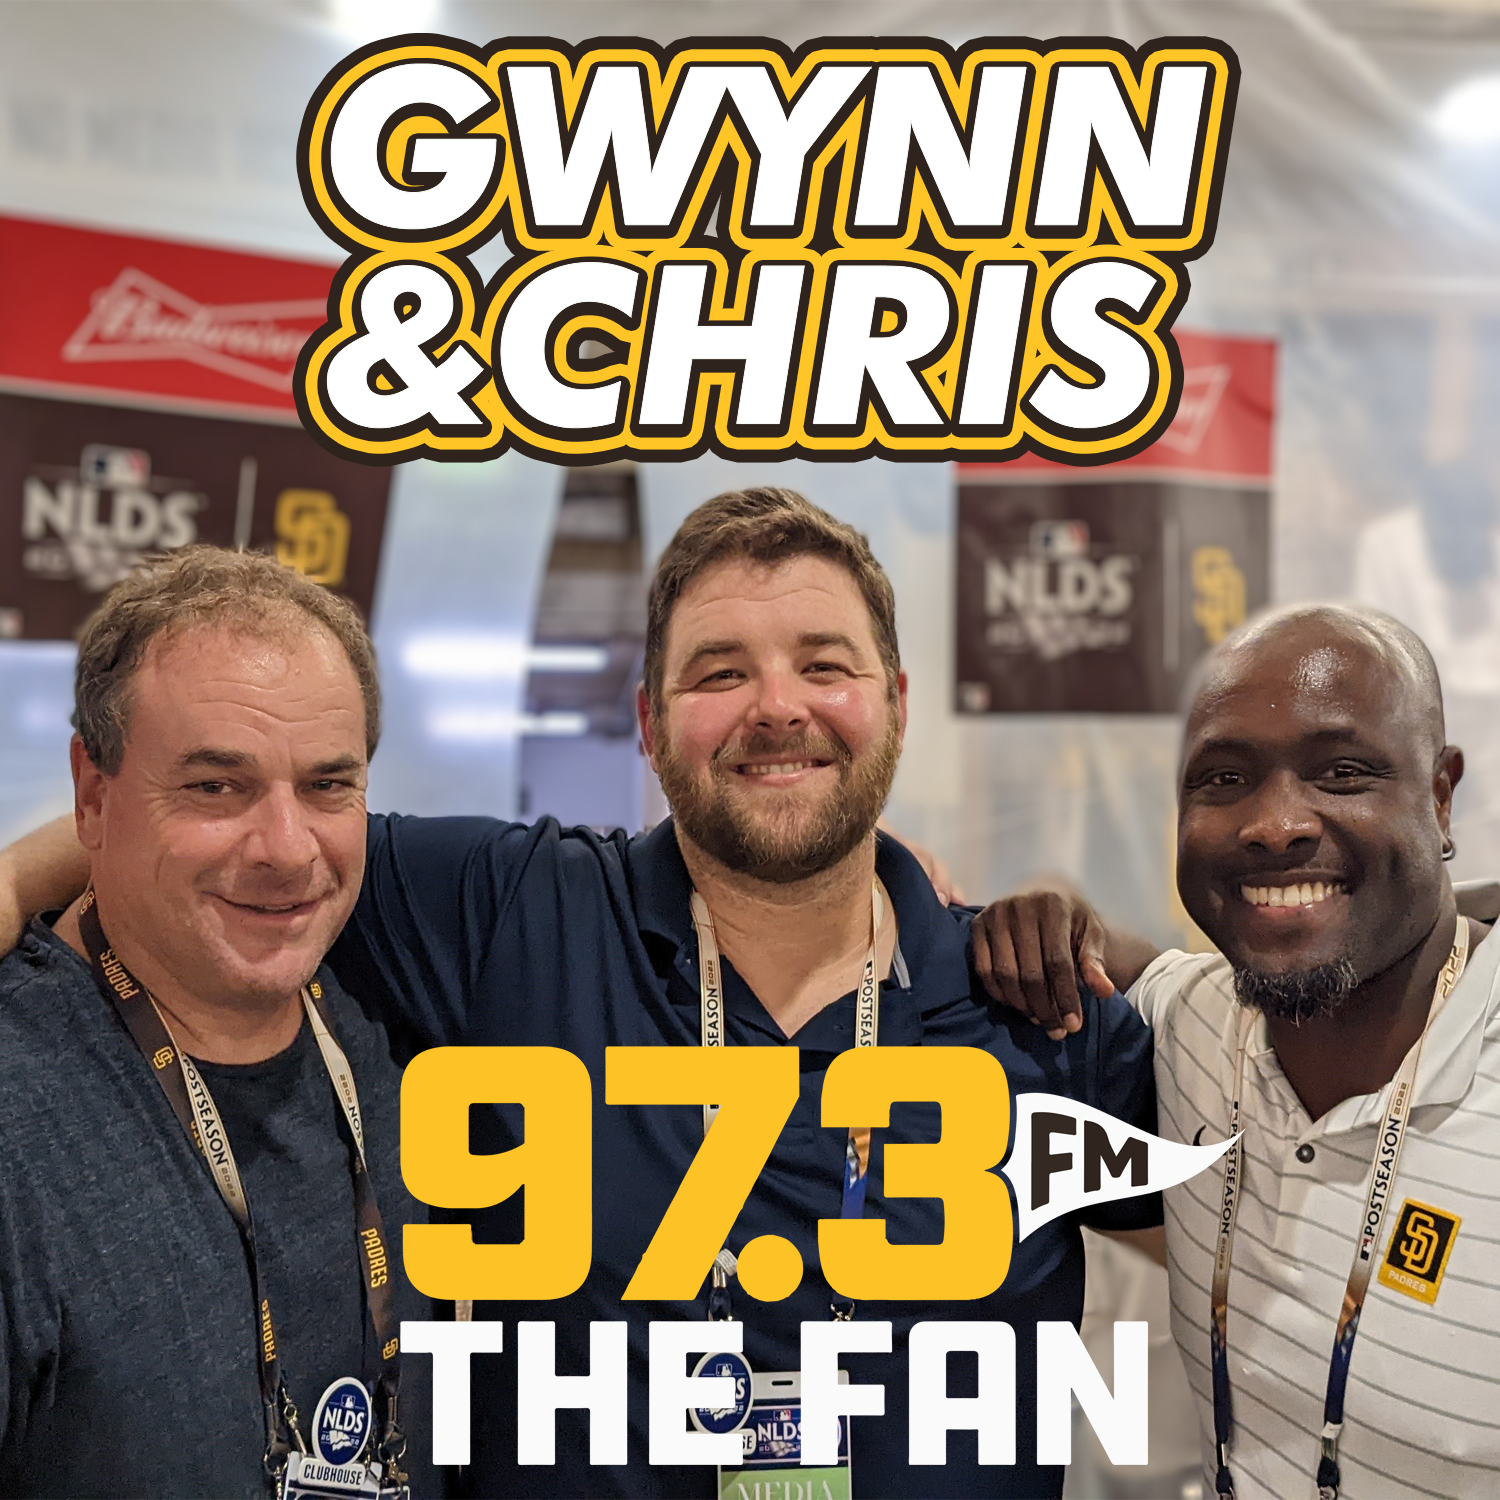 9.22.21 Gwynn & Chris Hour 1: Padres lose to Giants and the path ahead